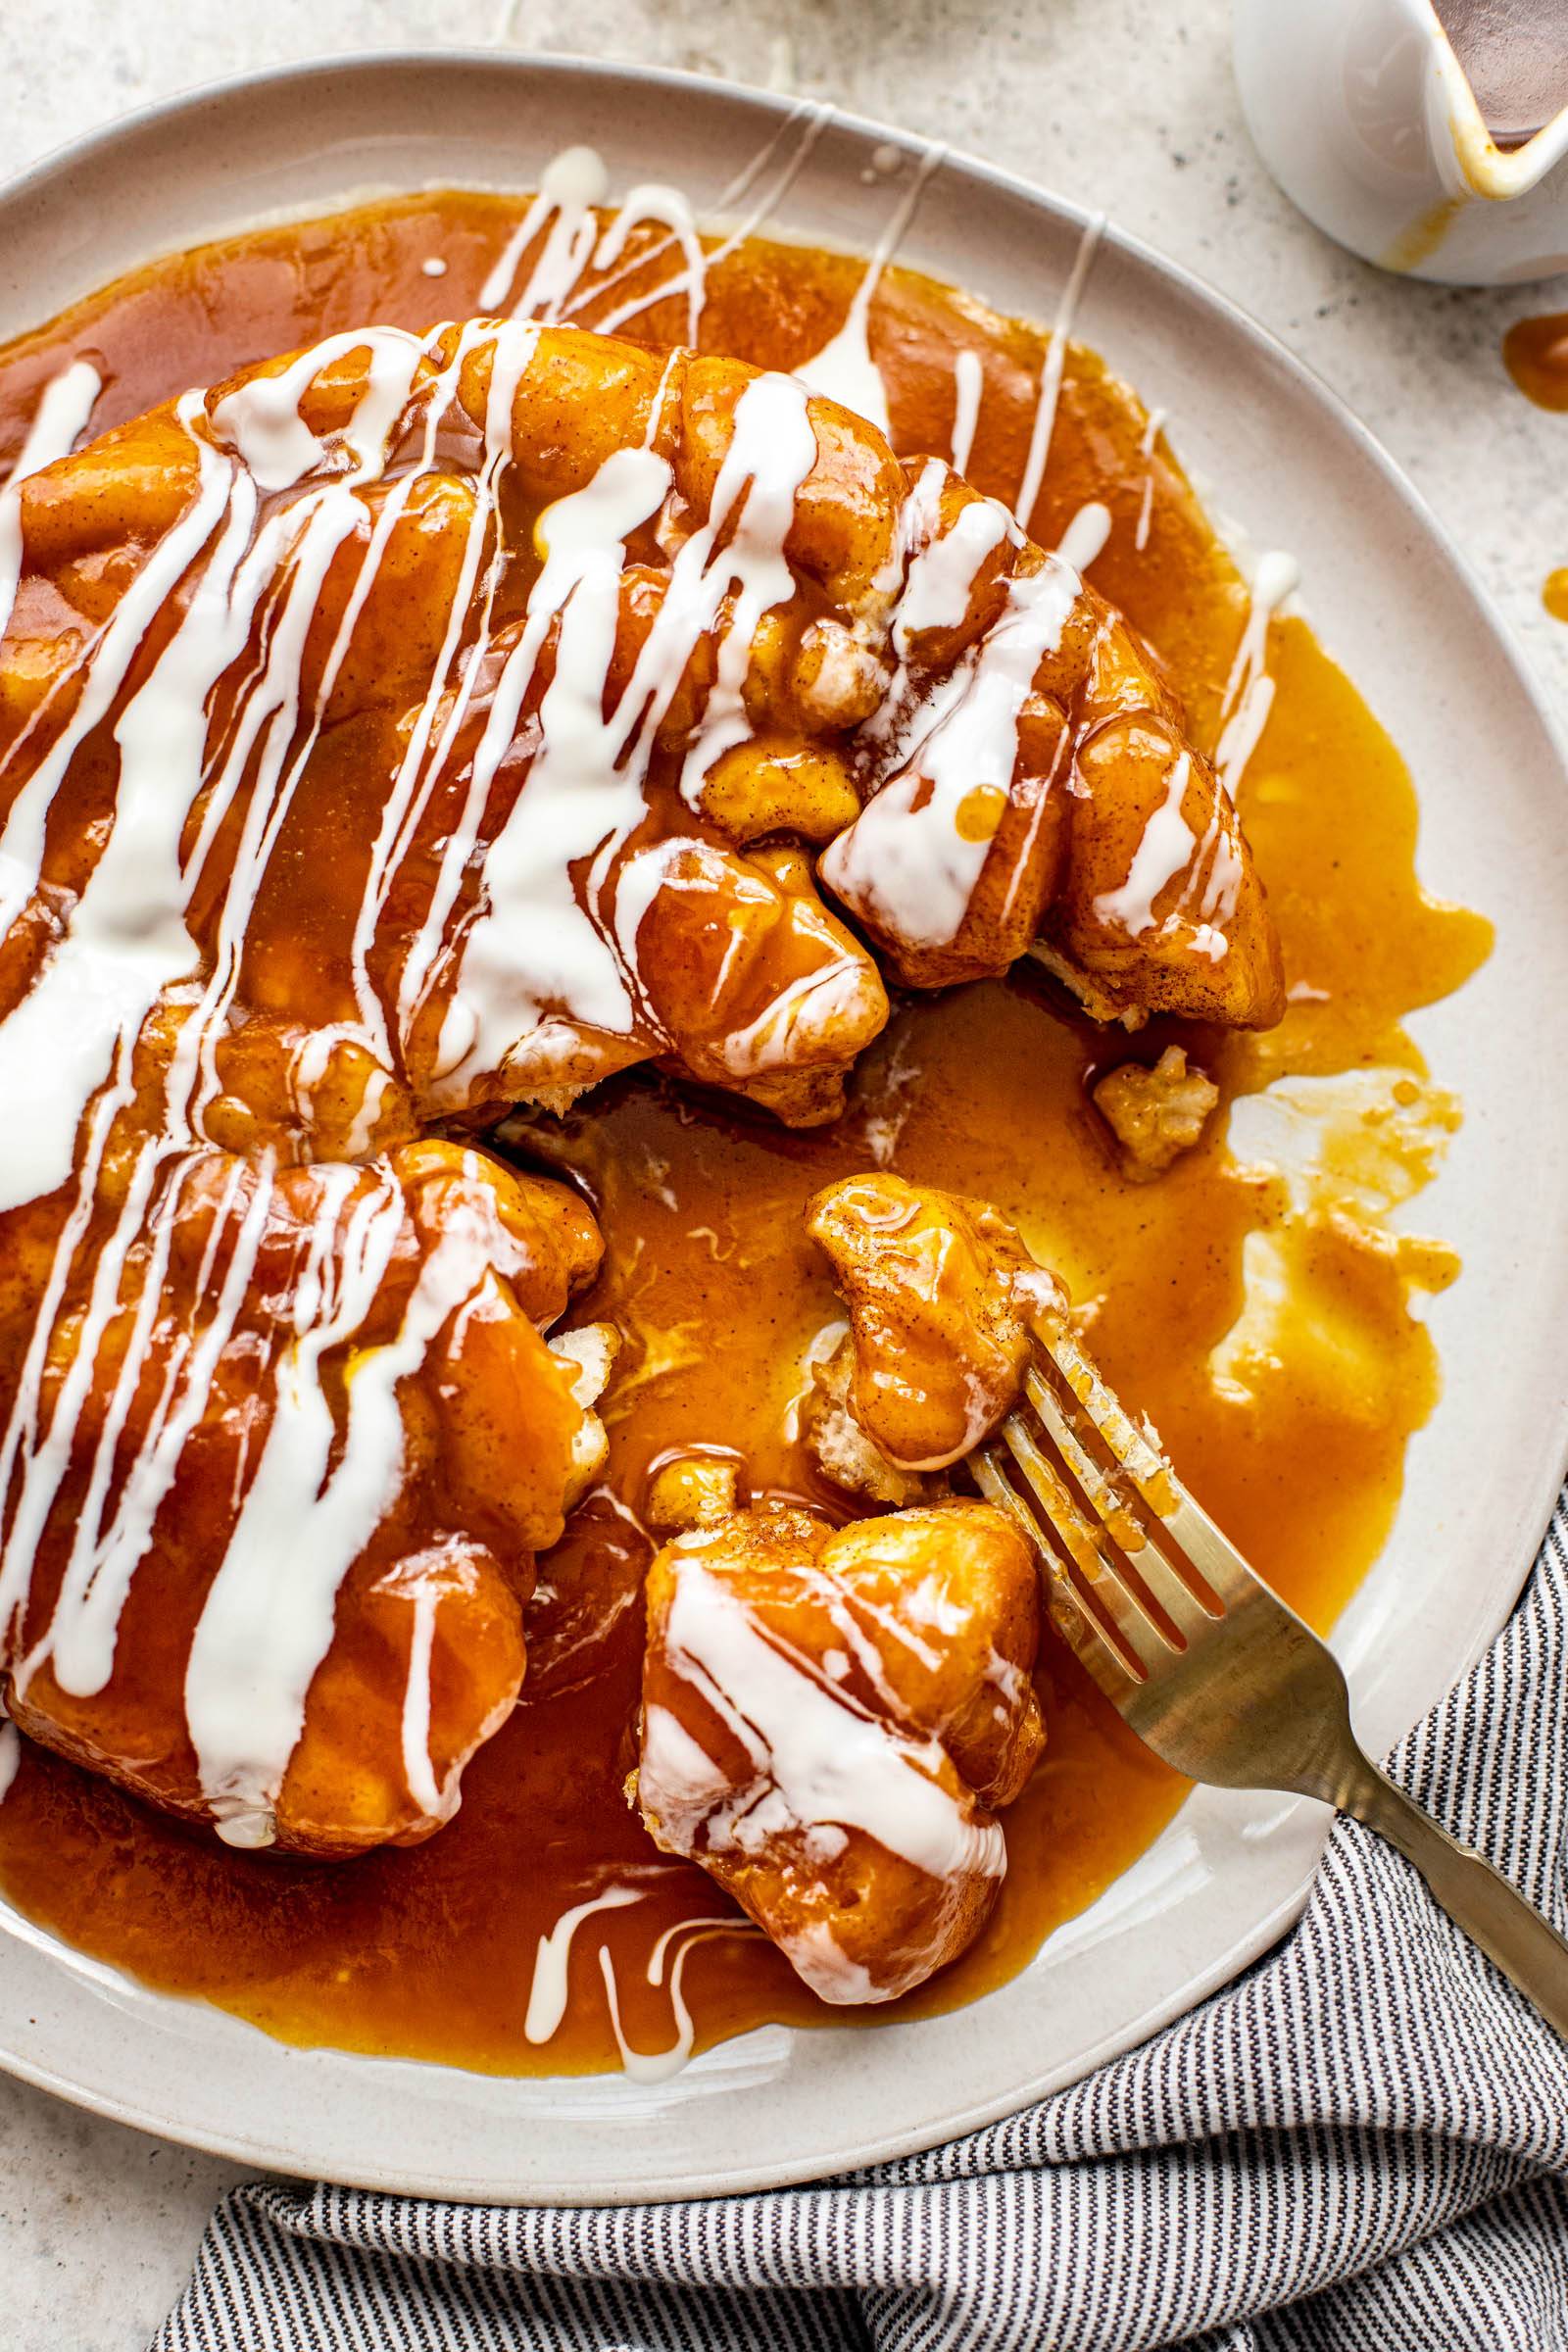 White chocolate drizzled with pumpkin and caramel monkey bread.